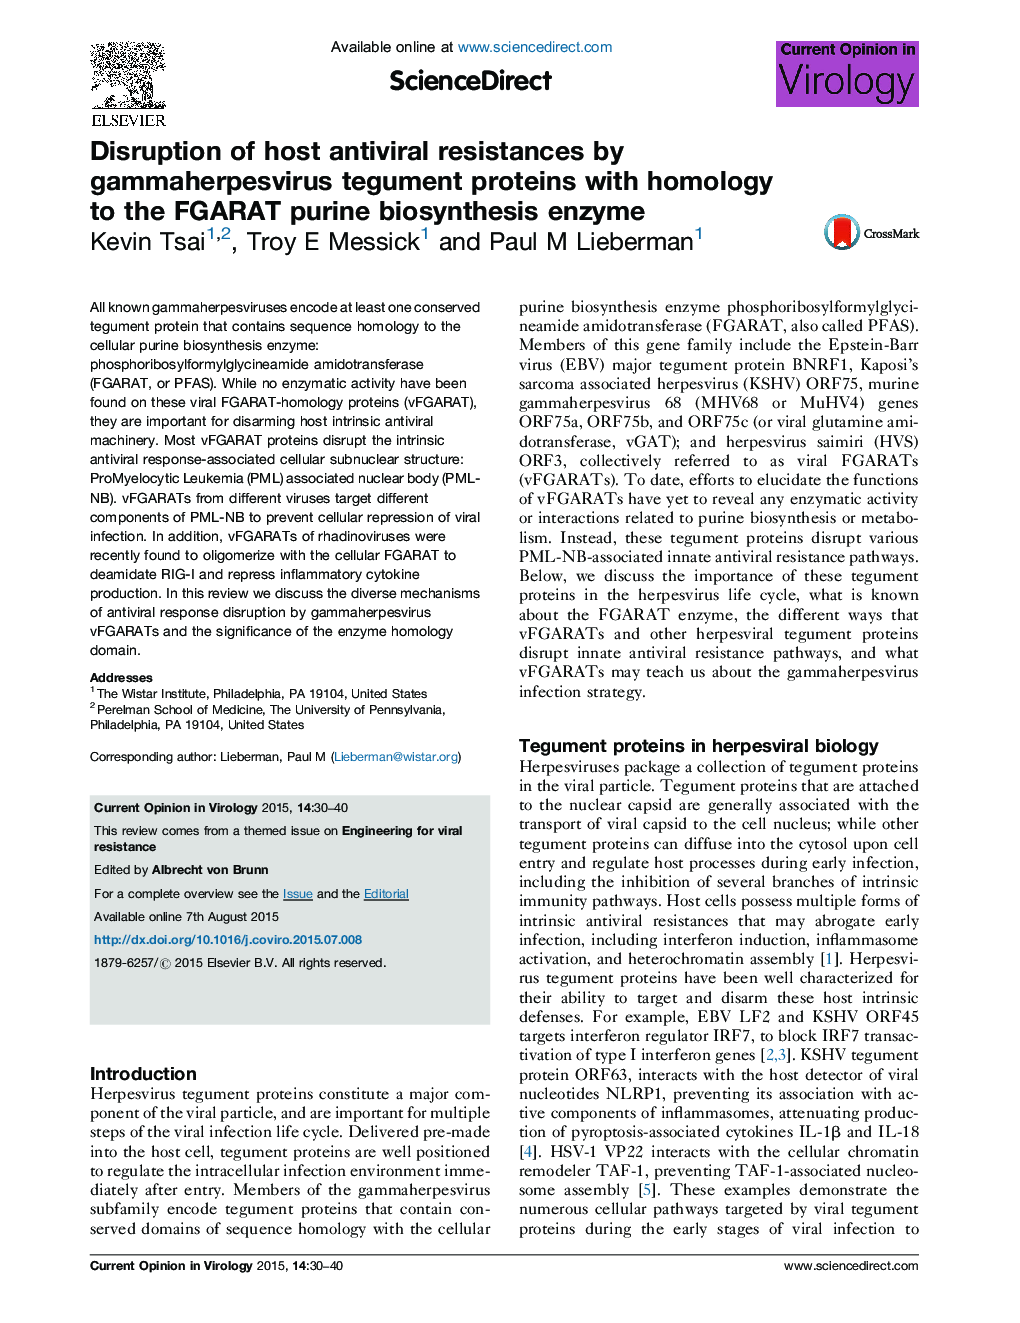 Disruption of host antiviral resistances by gammaherpesvirus tegument proteins with homology to the FGARAT purine biosynthesis enzyme